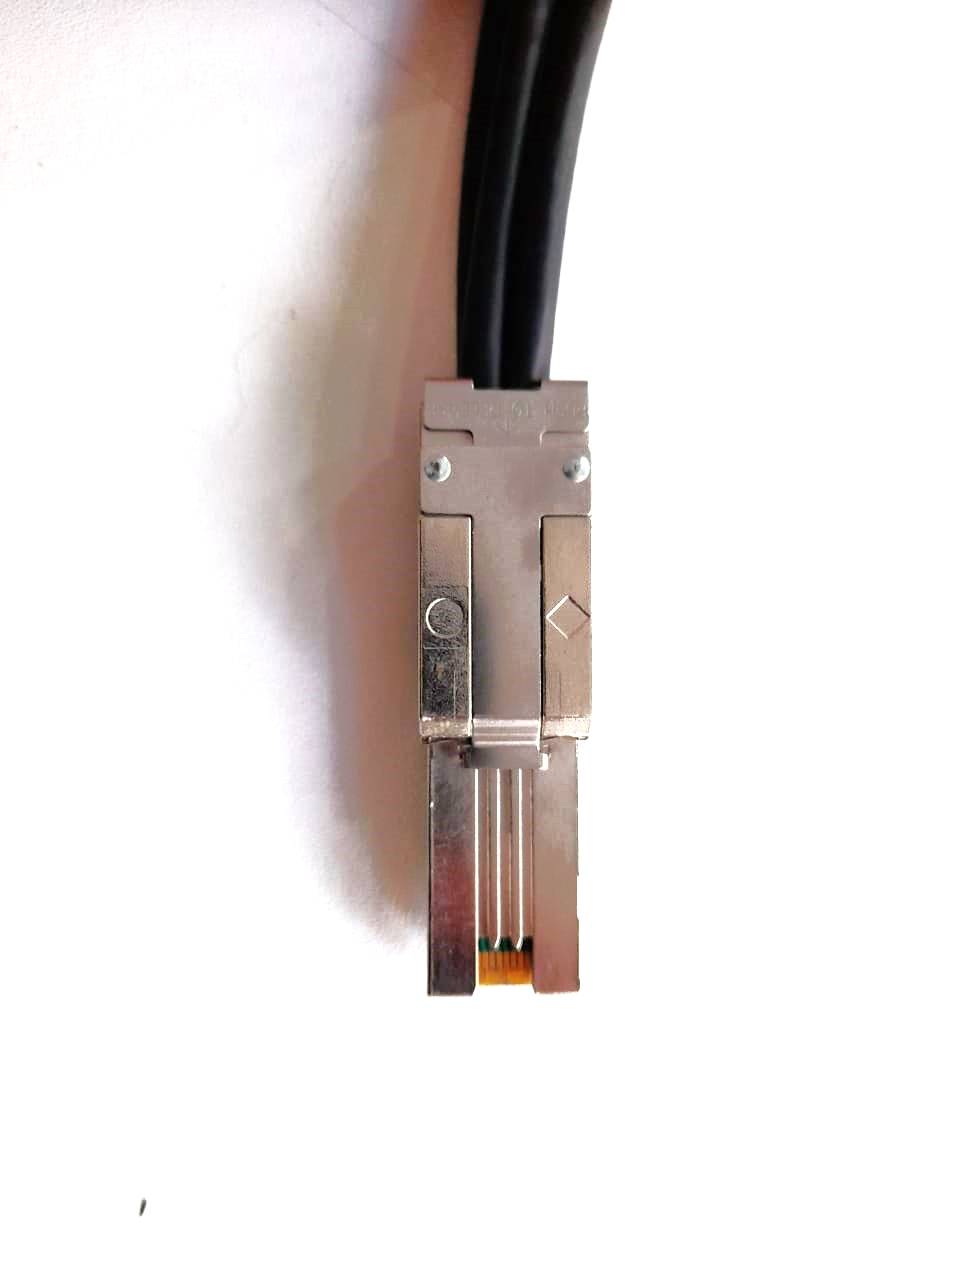 CABLE-DE-RED-MINI-SAS-4×1-HP-AN975A-idkmanager3.jpeg